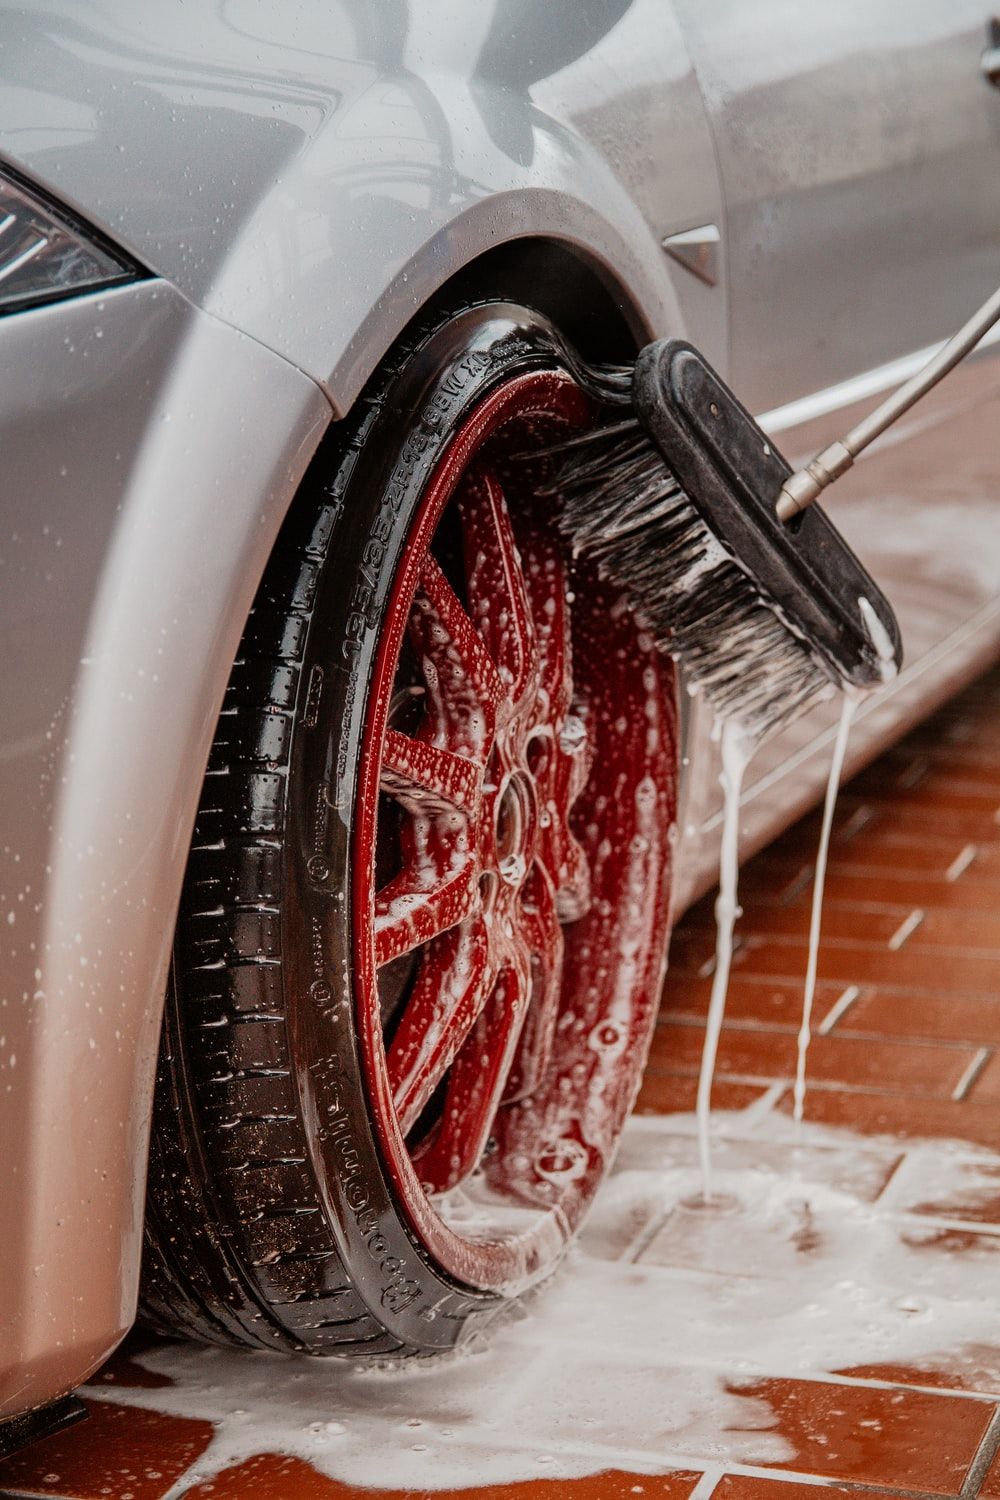 Car Wash Picture. Download Free Image